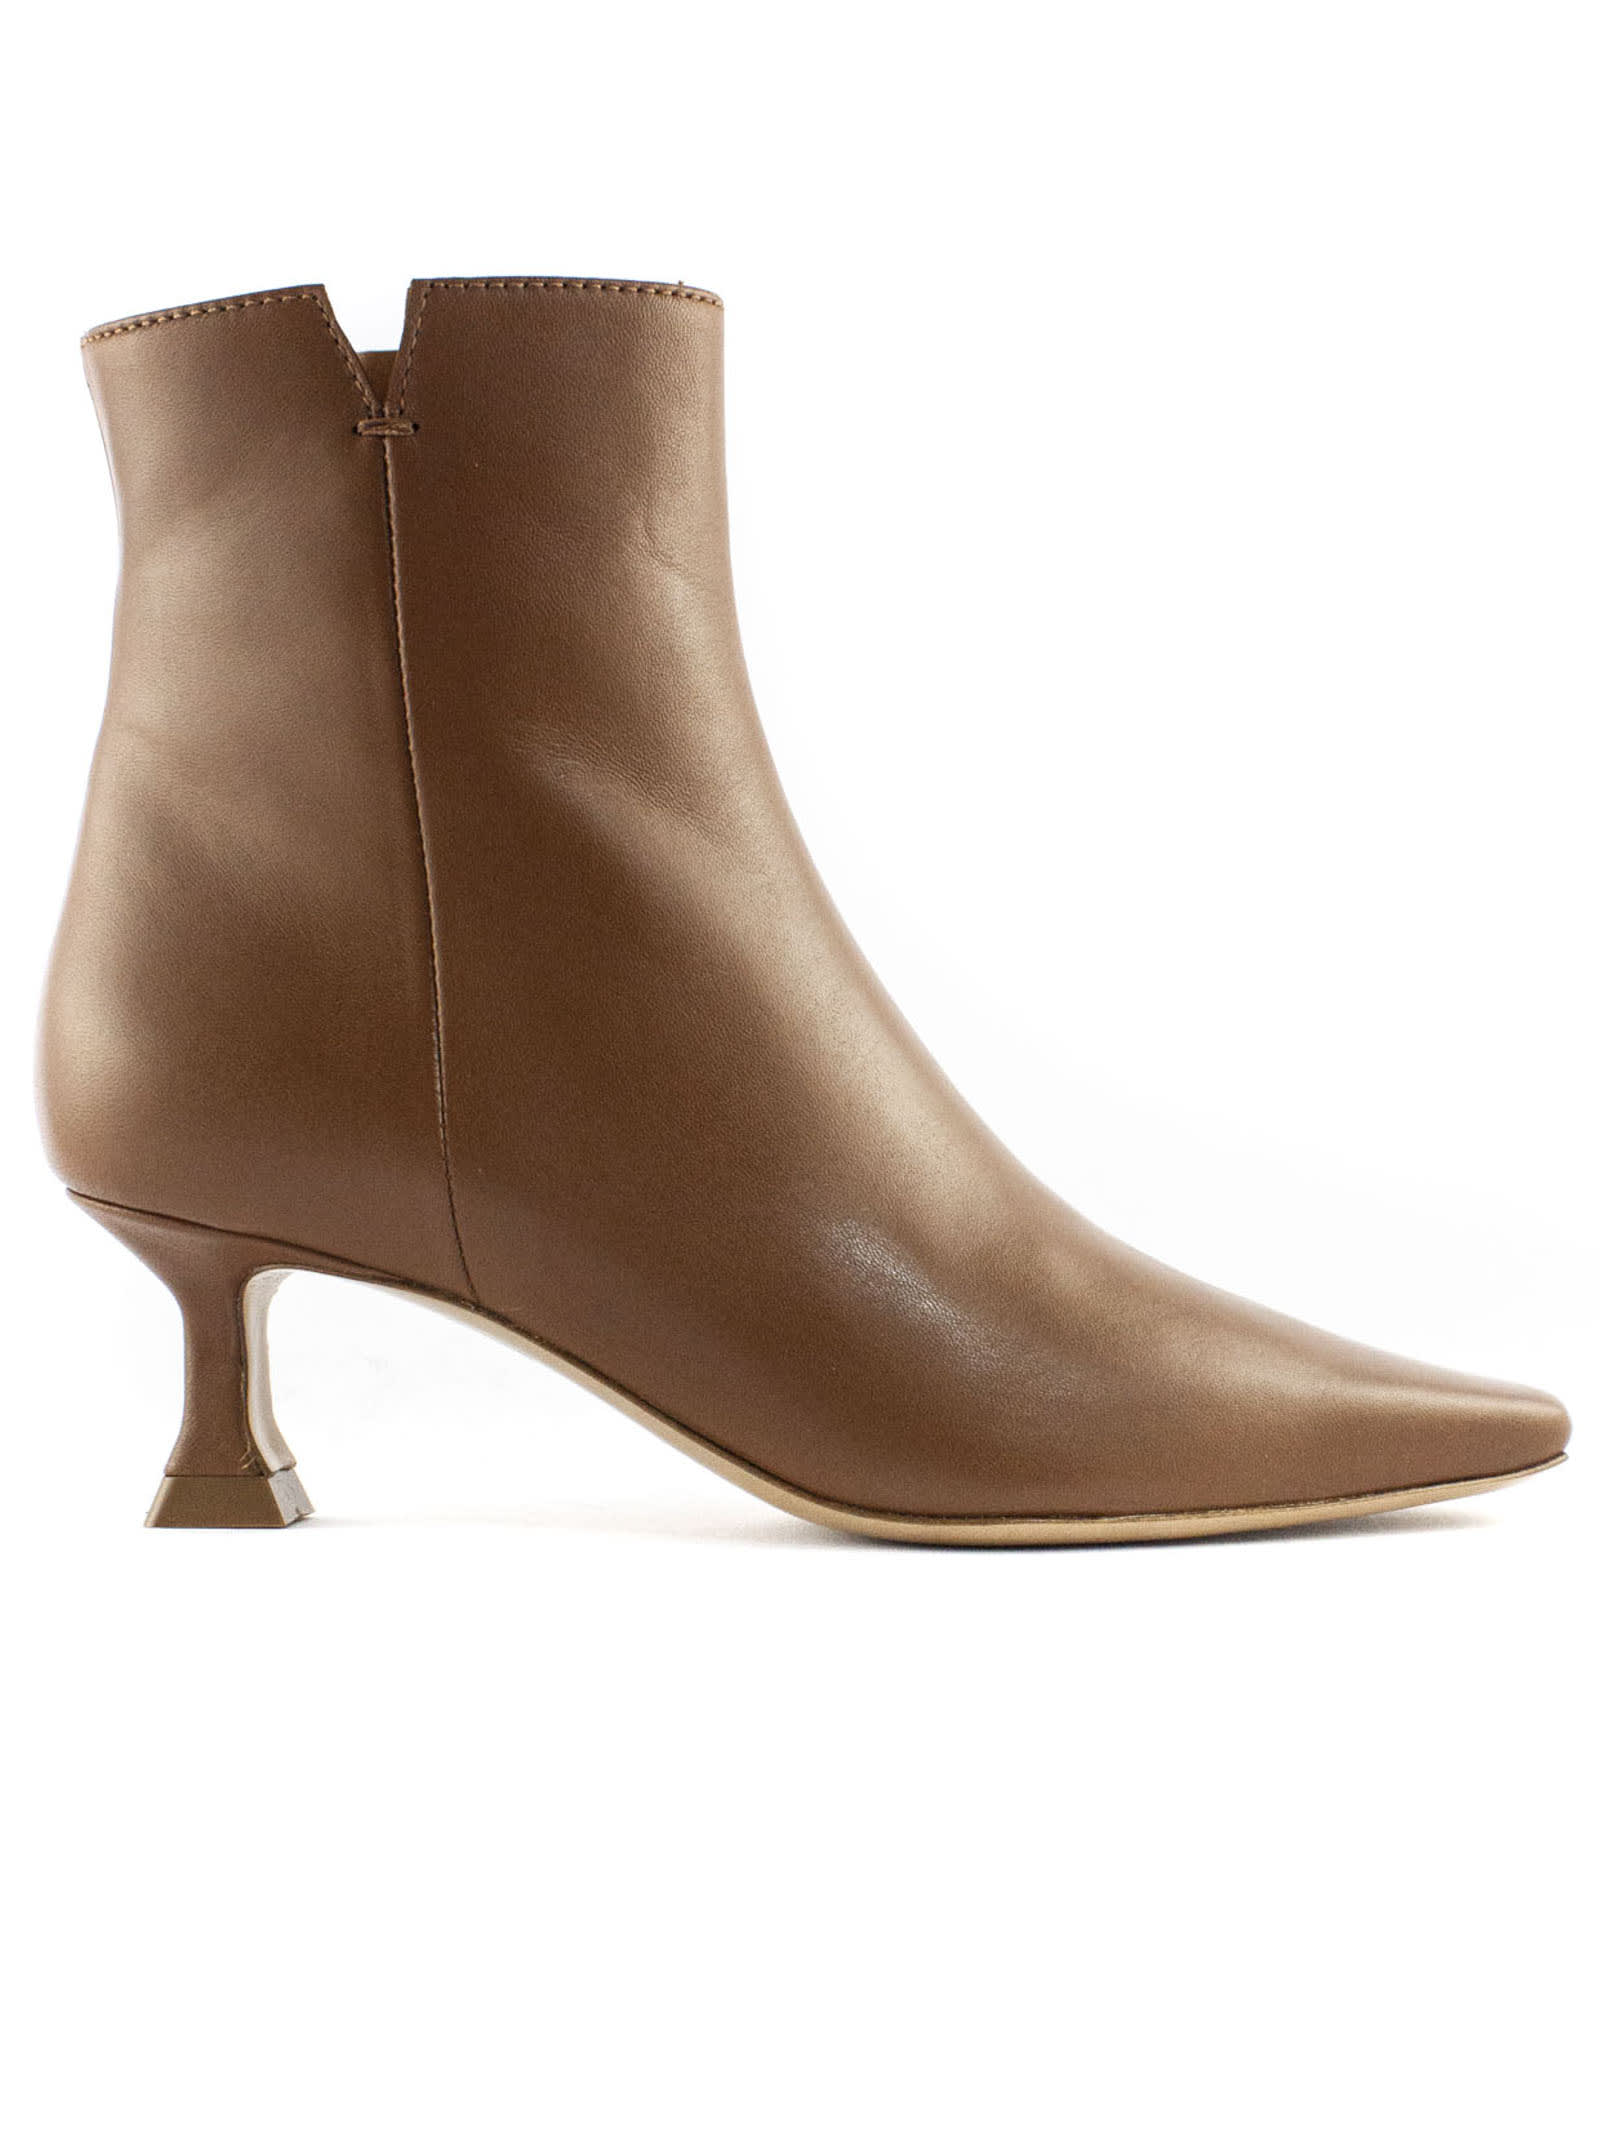 Roberto Festa Brown Beige Leather Ankle Boot